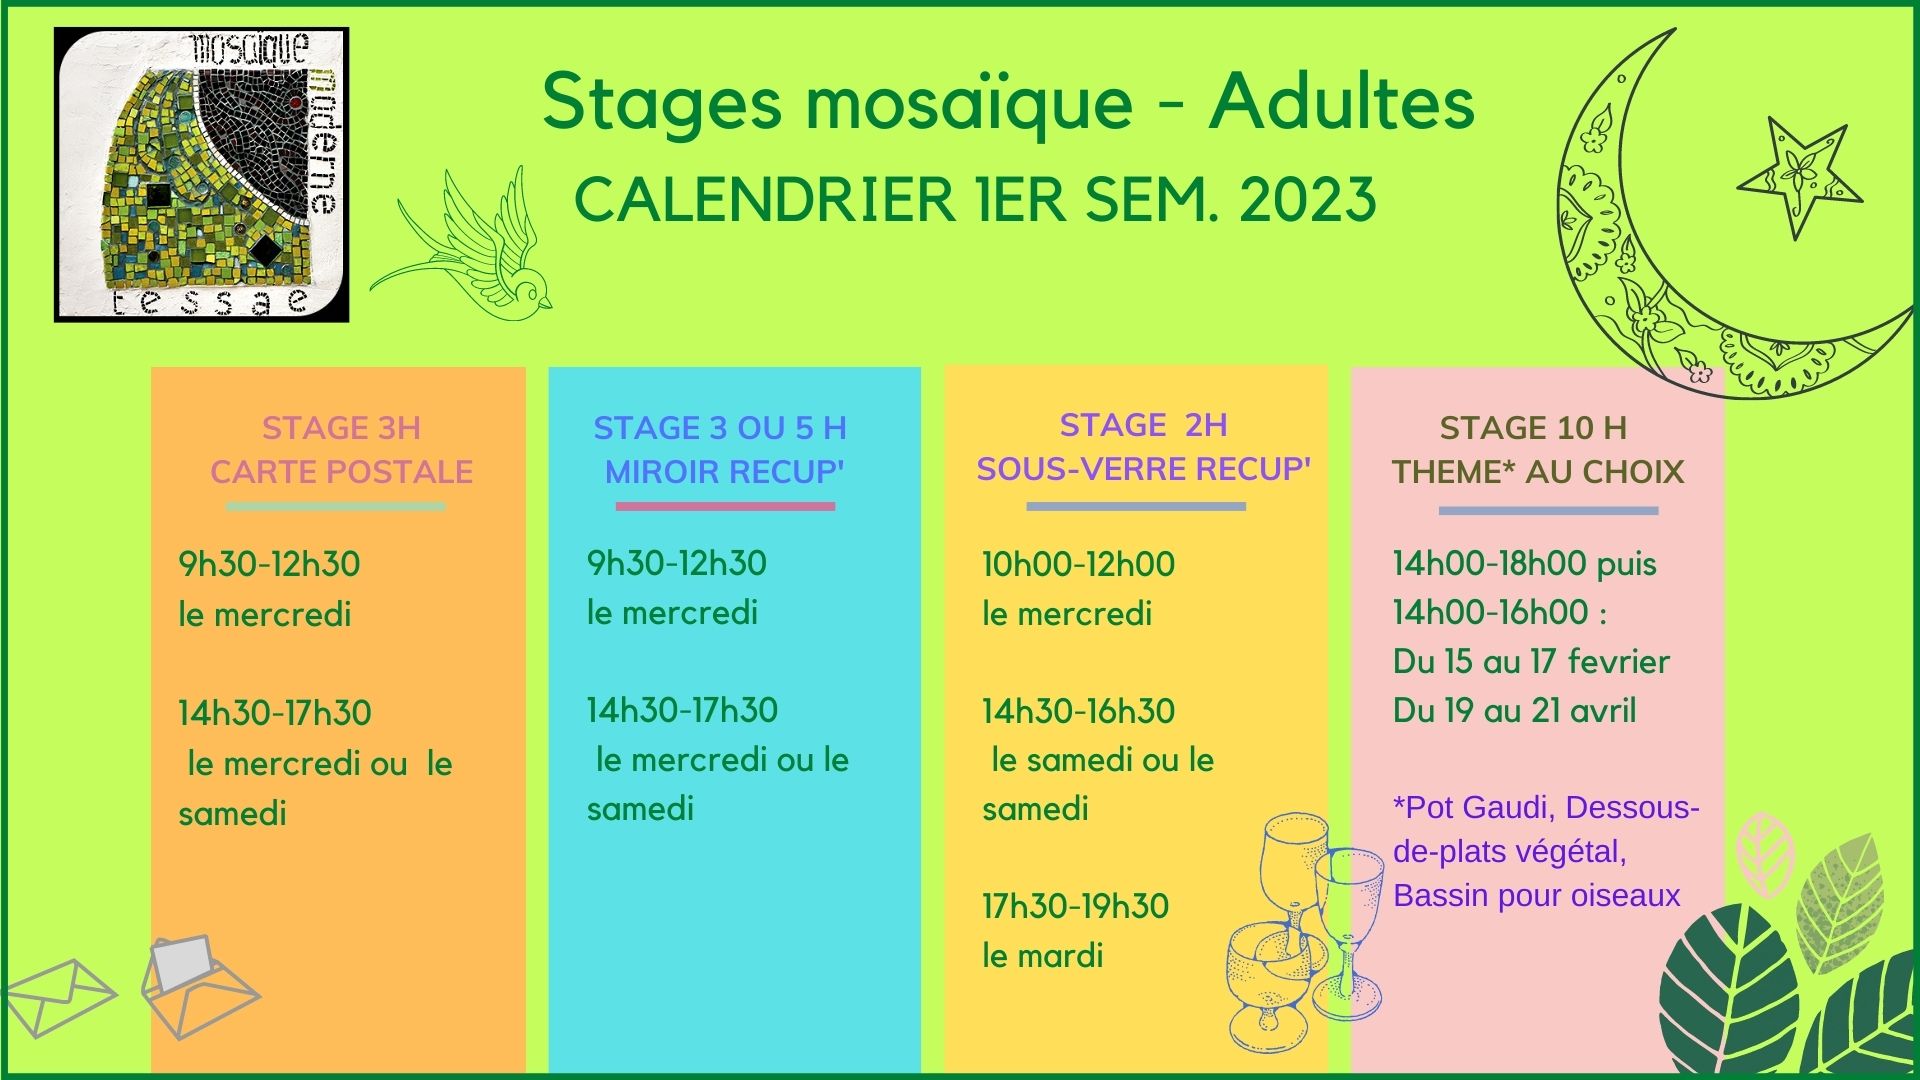 Calendrier stages 202- 23